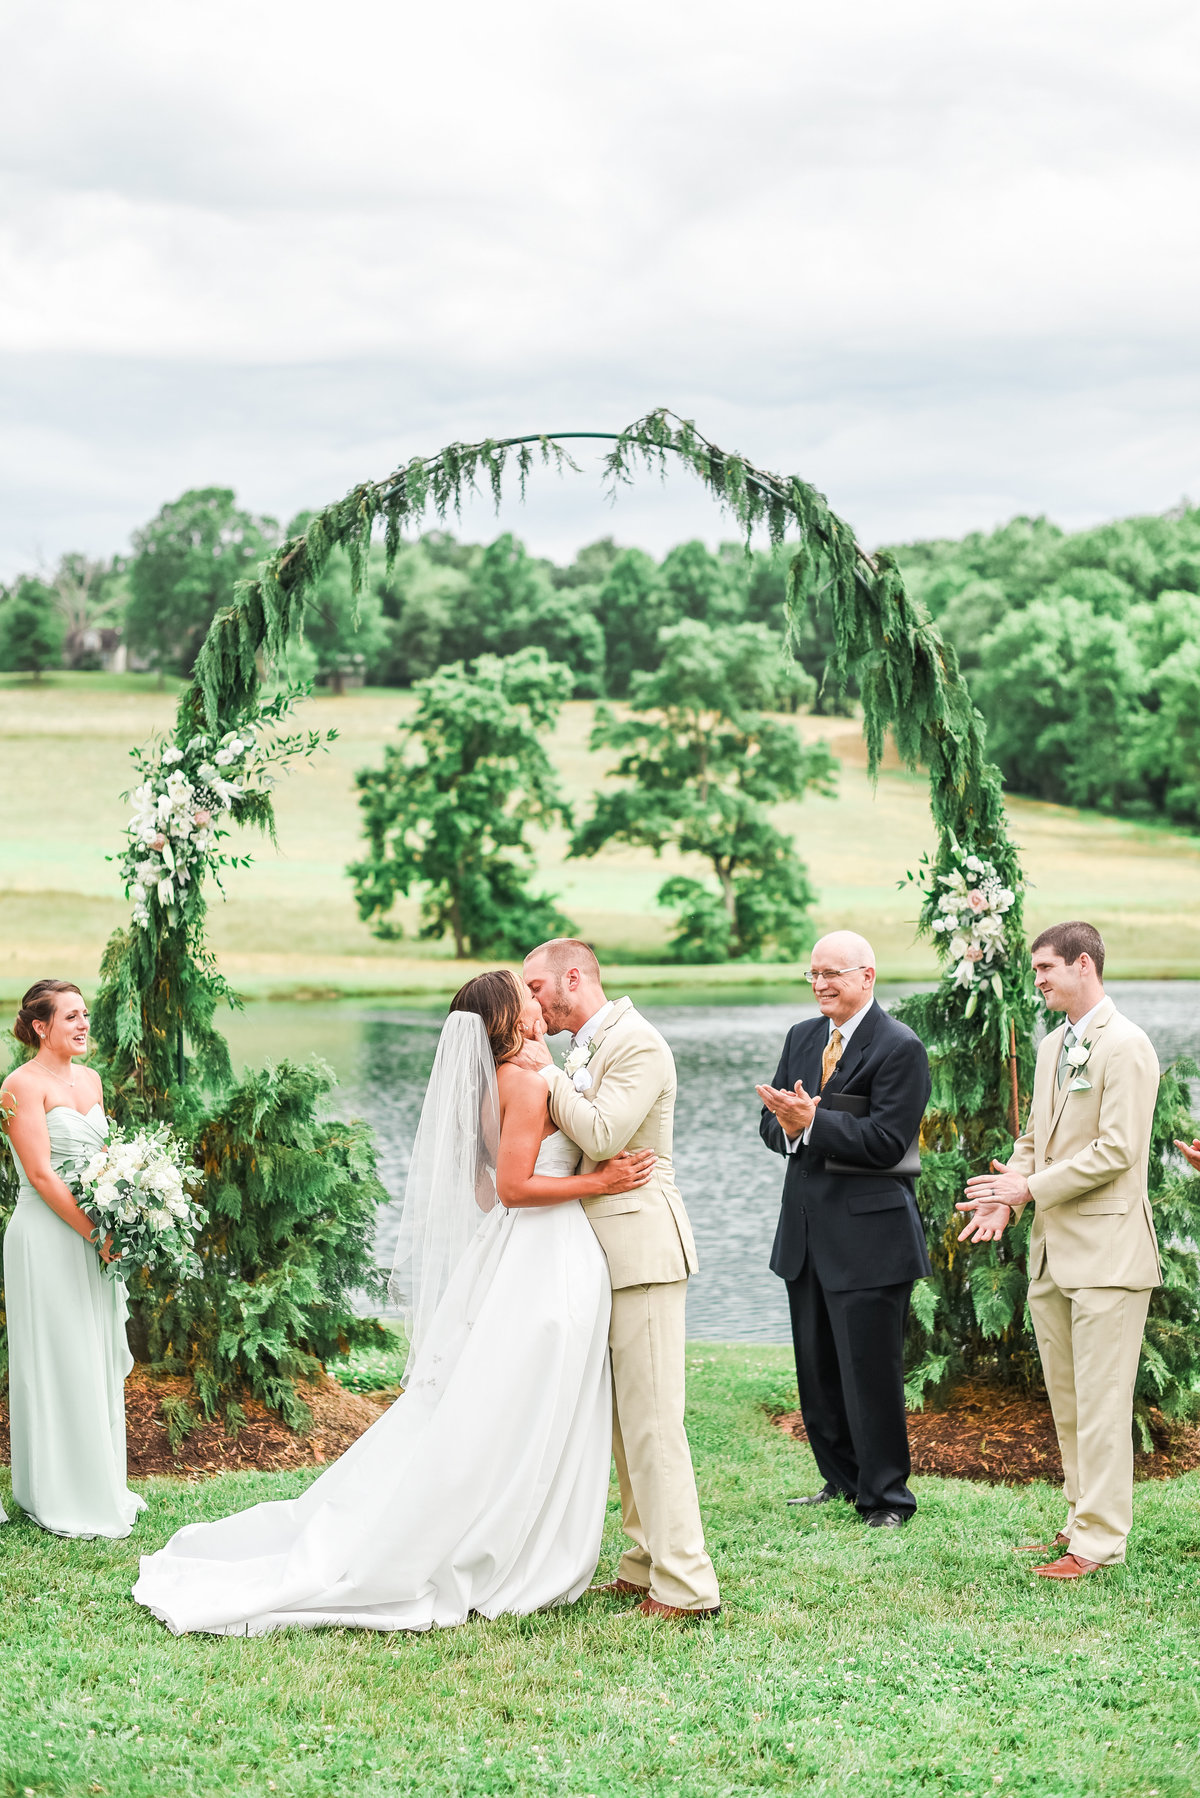 First kiss overlooking ceremony space at stone ridge hollow maryland